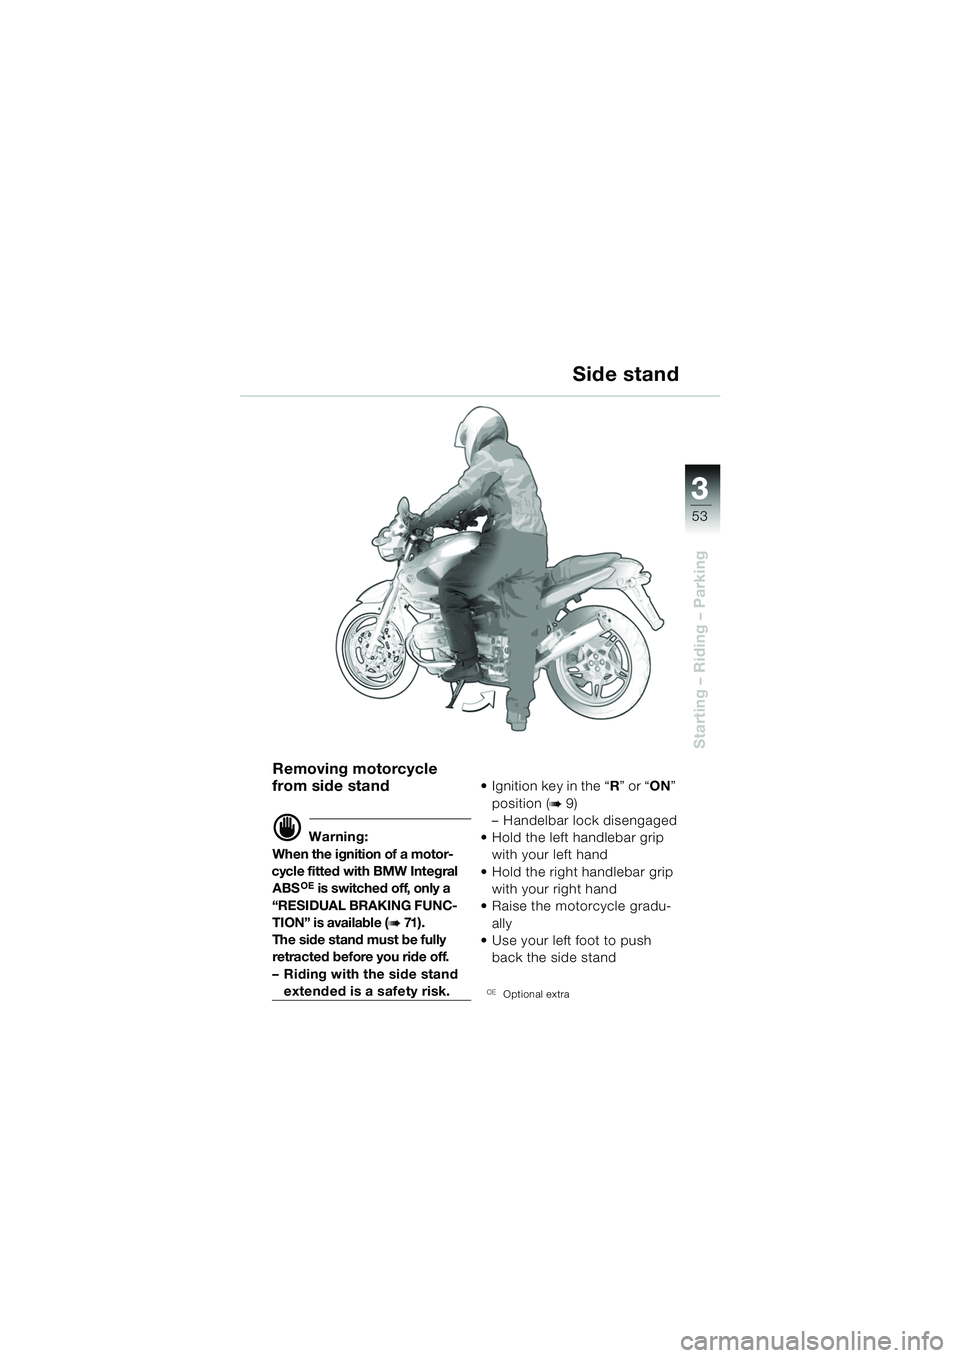 BMW MOTORRAD R 850 R 2004  Riders Manual (in English) 3
53
3
Starting – Riding – Parking
Removing motorcycle 
from side stand
d Warning:
When the ignition of a motor-
cycle fitted with BMW Integral 
ABS
OE is switched off, only a 
“RESIDUAL BRAKING